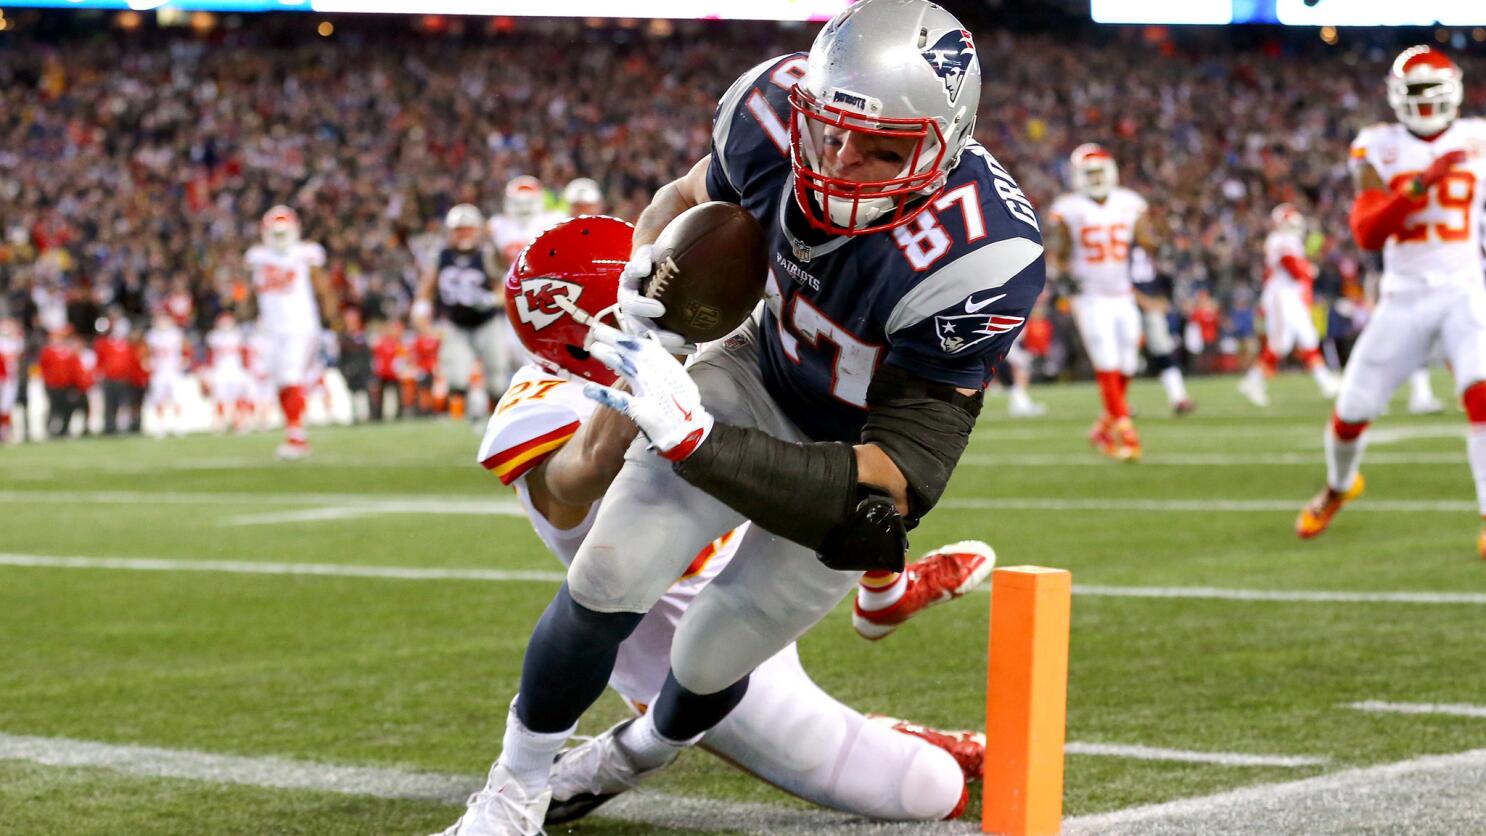 Brady Leads Late Field Goal Drive To Keep Patriots Undefeated